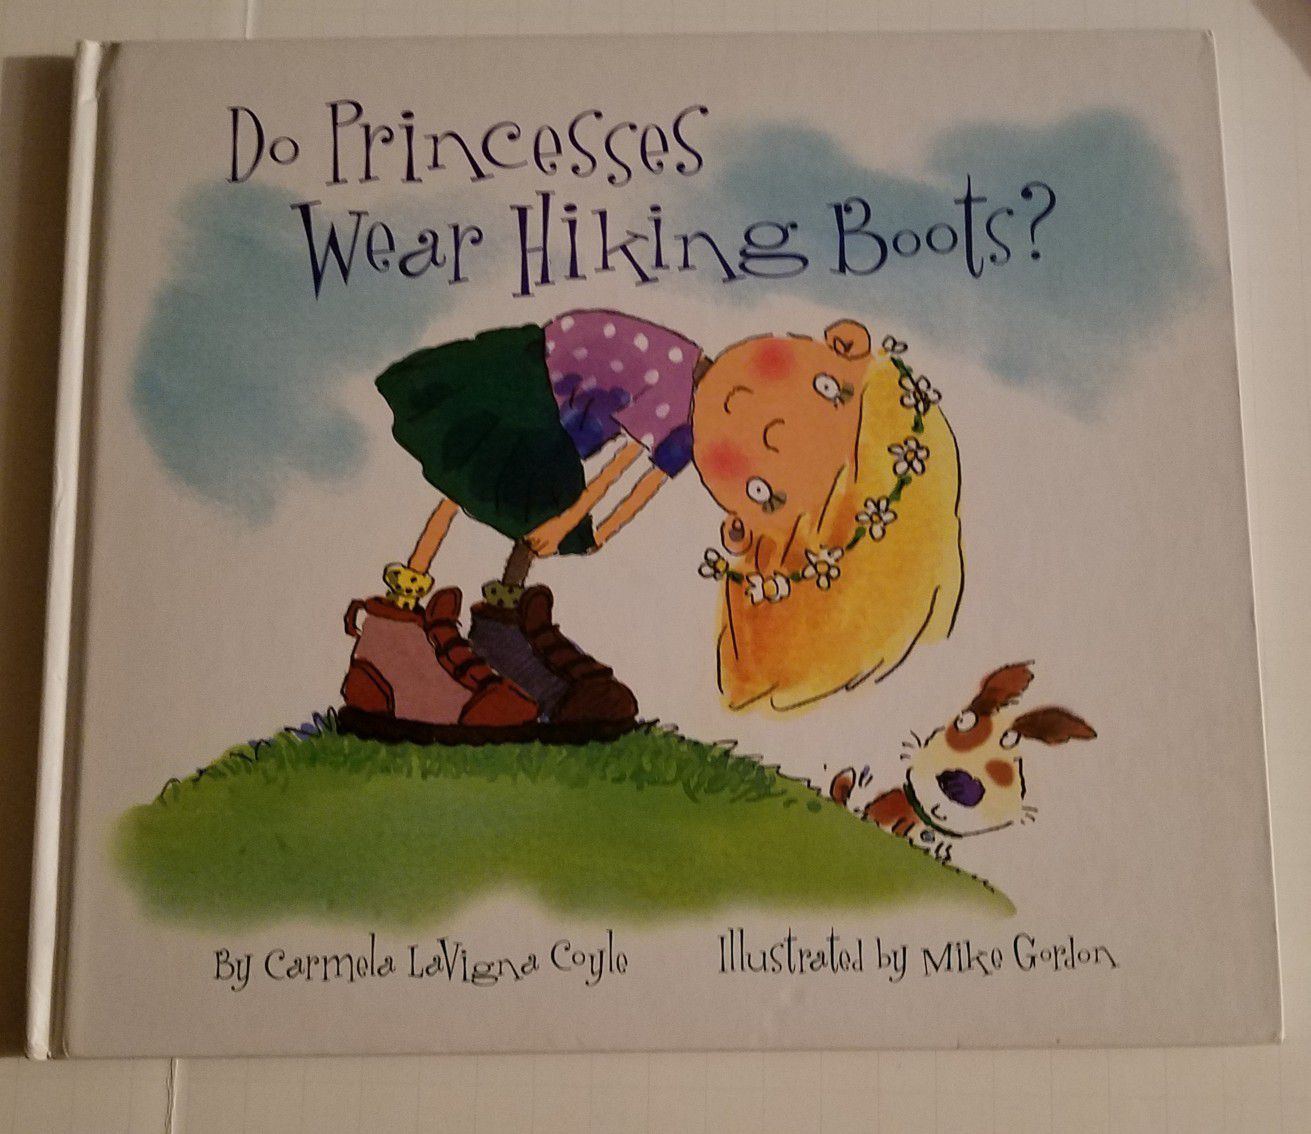 Do Princesses wear hiking boots book